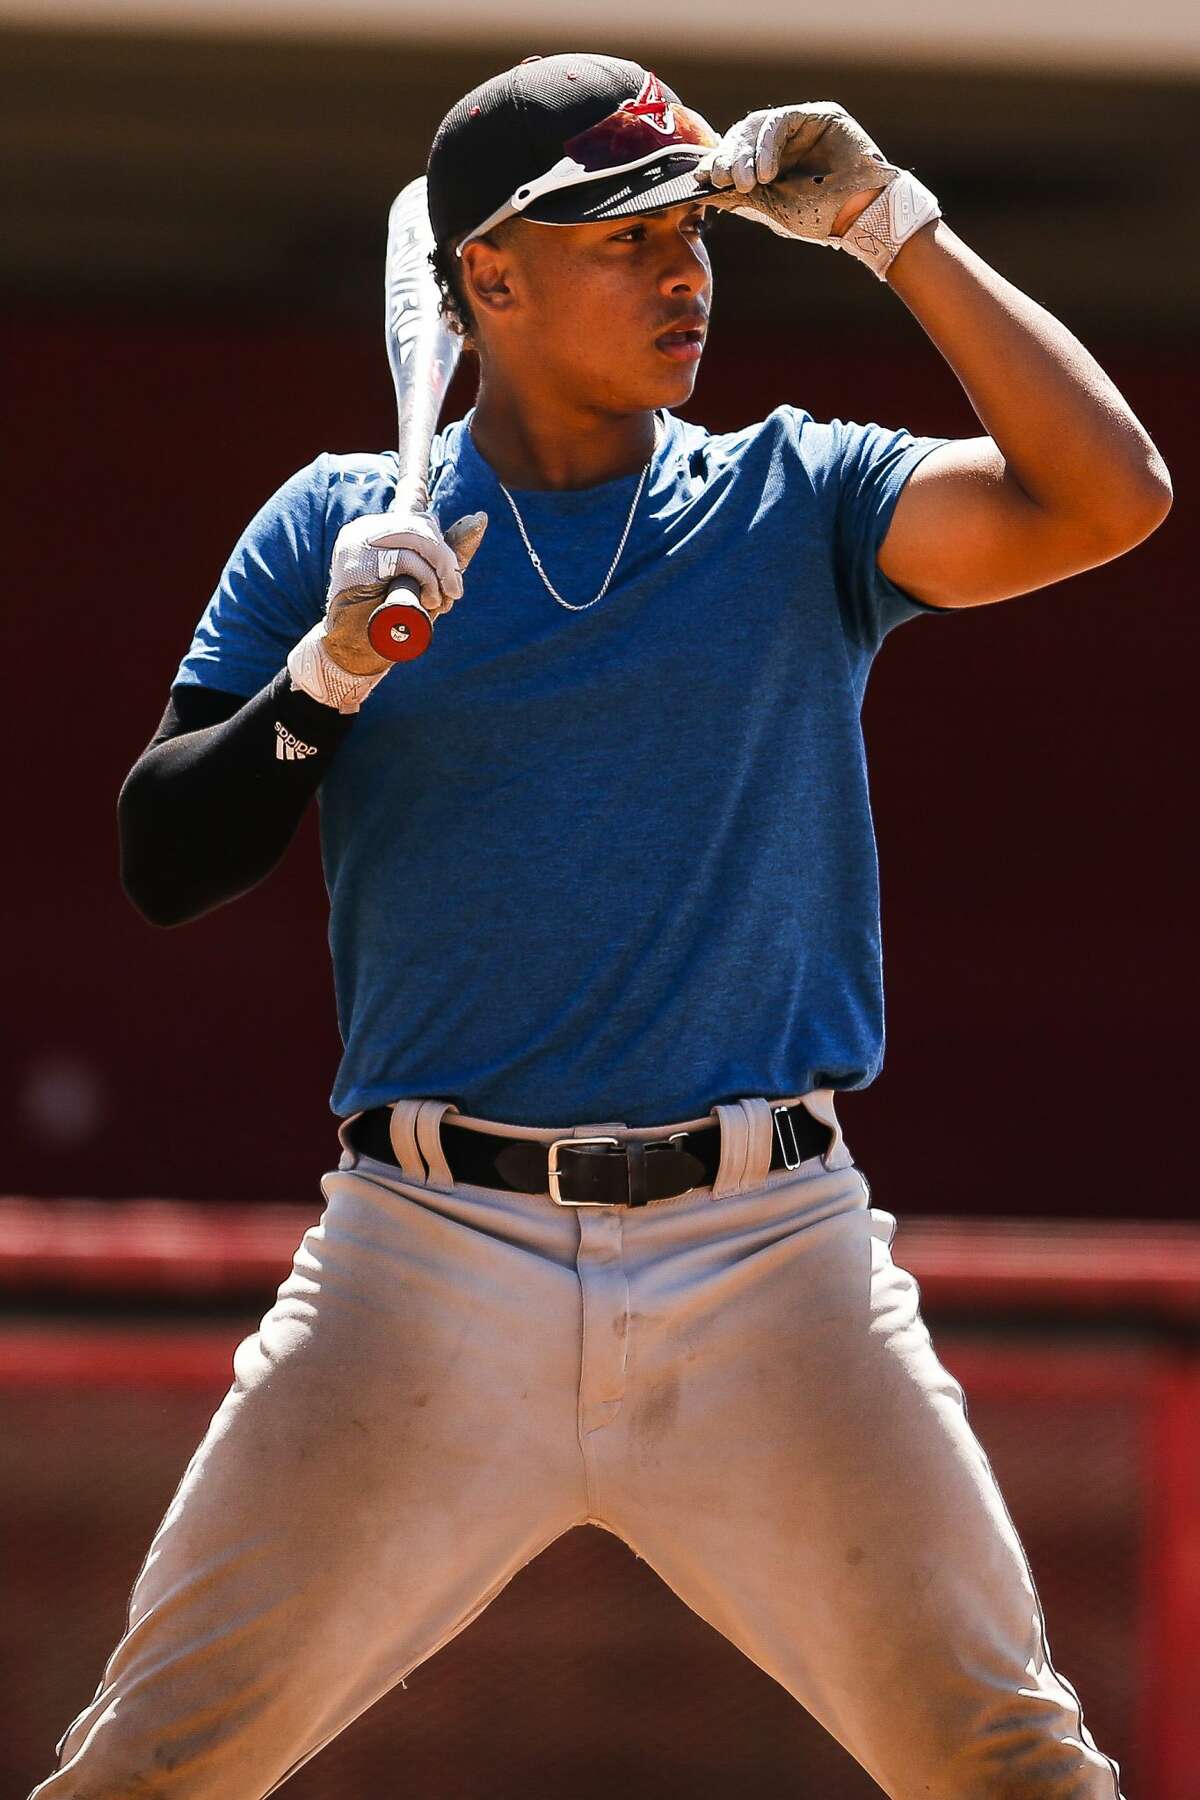 Updated: Brother of Astro Carlos Correa commits to Lamar baseball